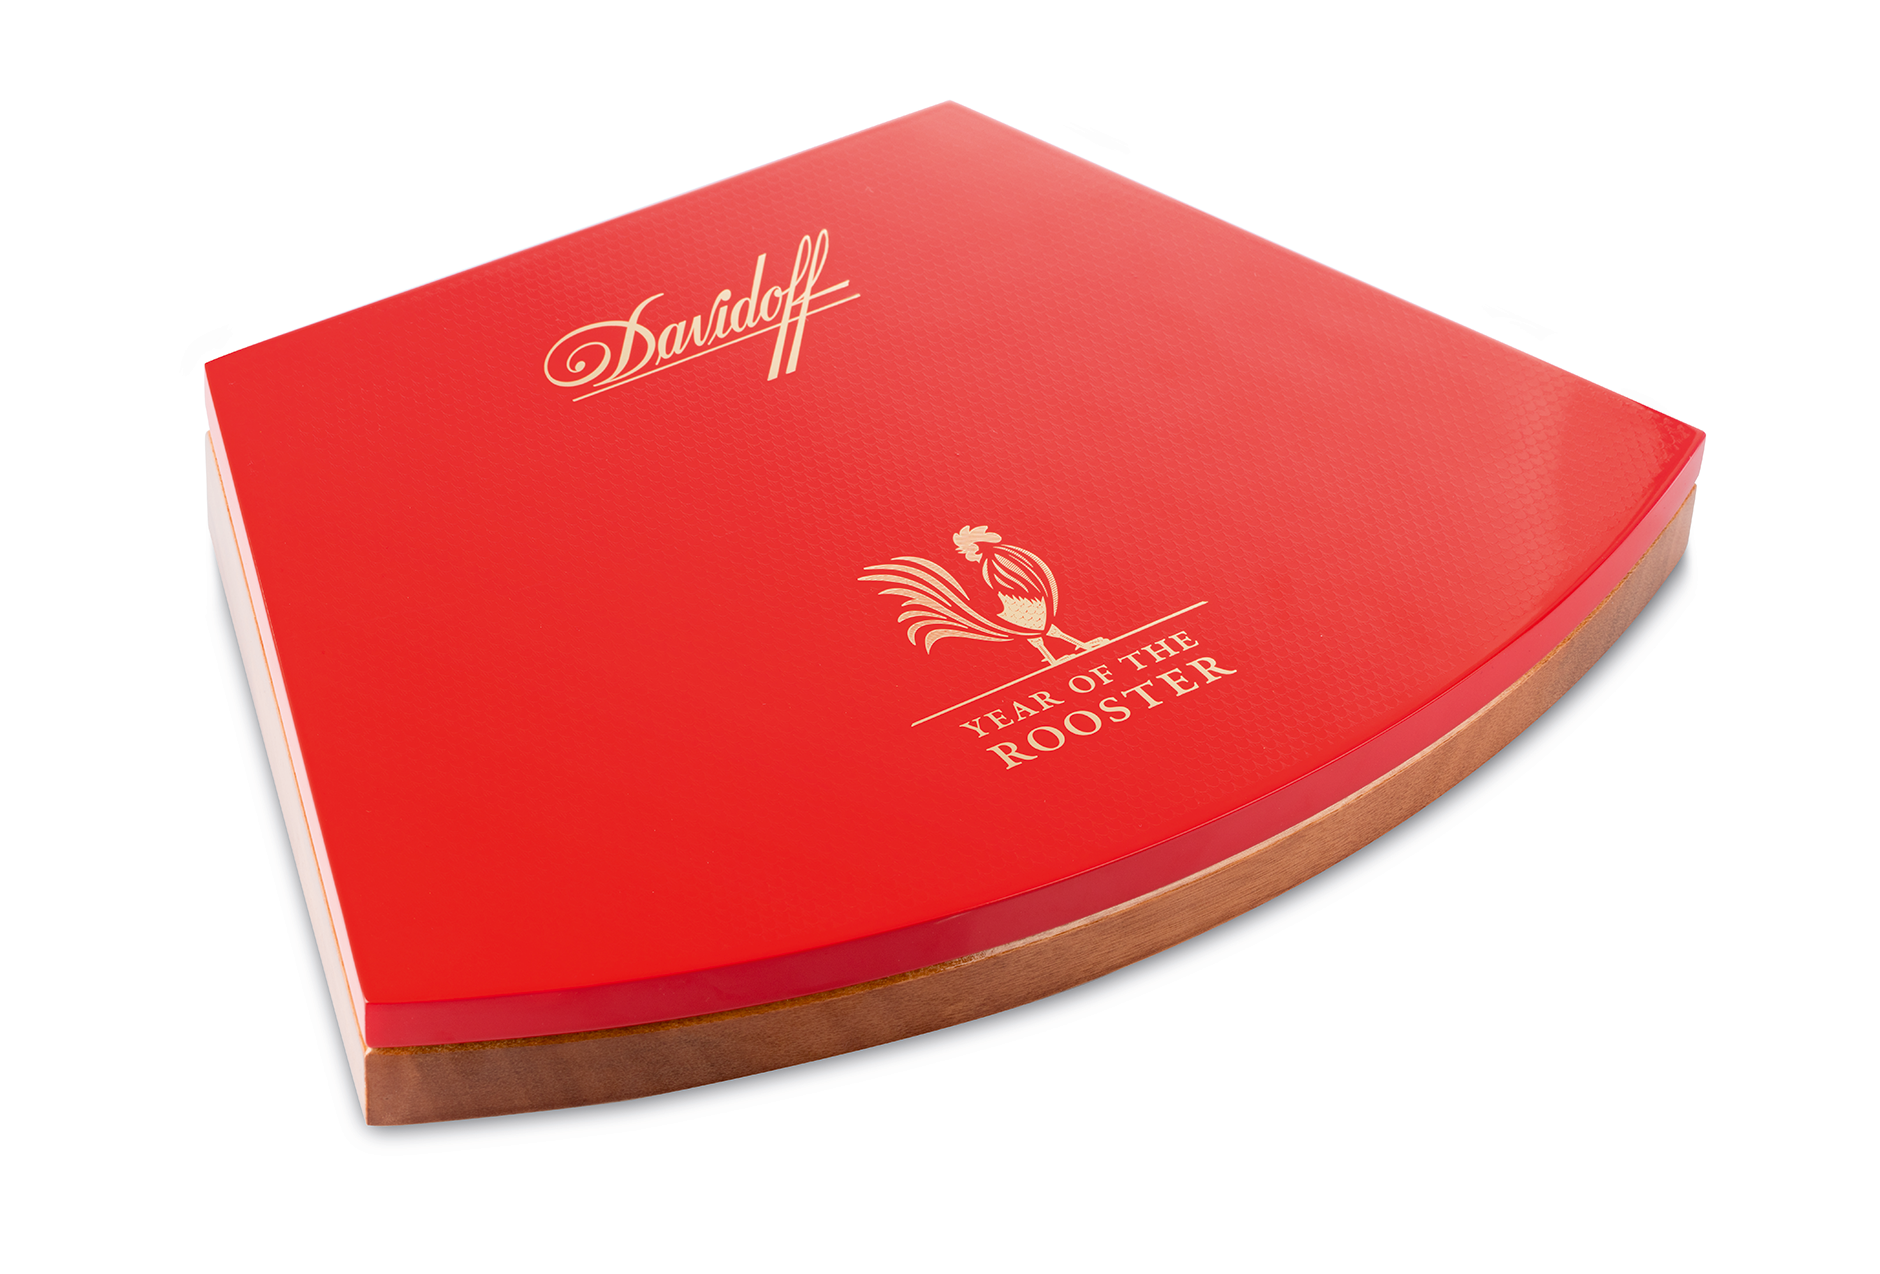 davidoff-year-of-the-rooster-box-001-feature